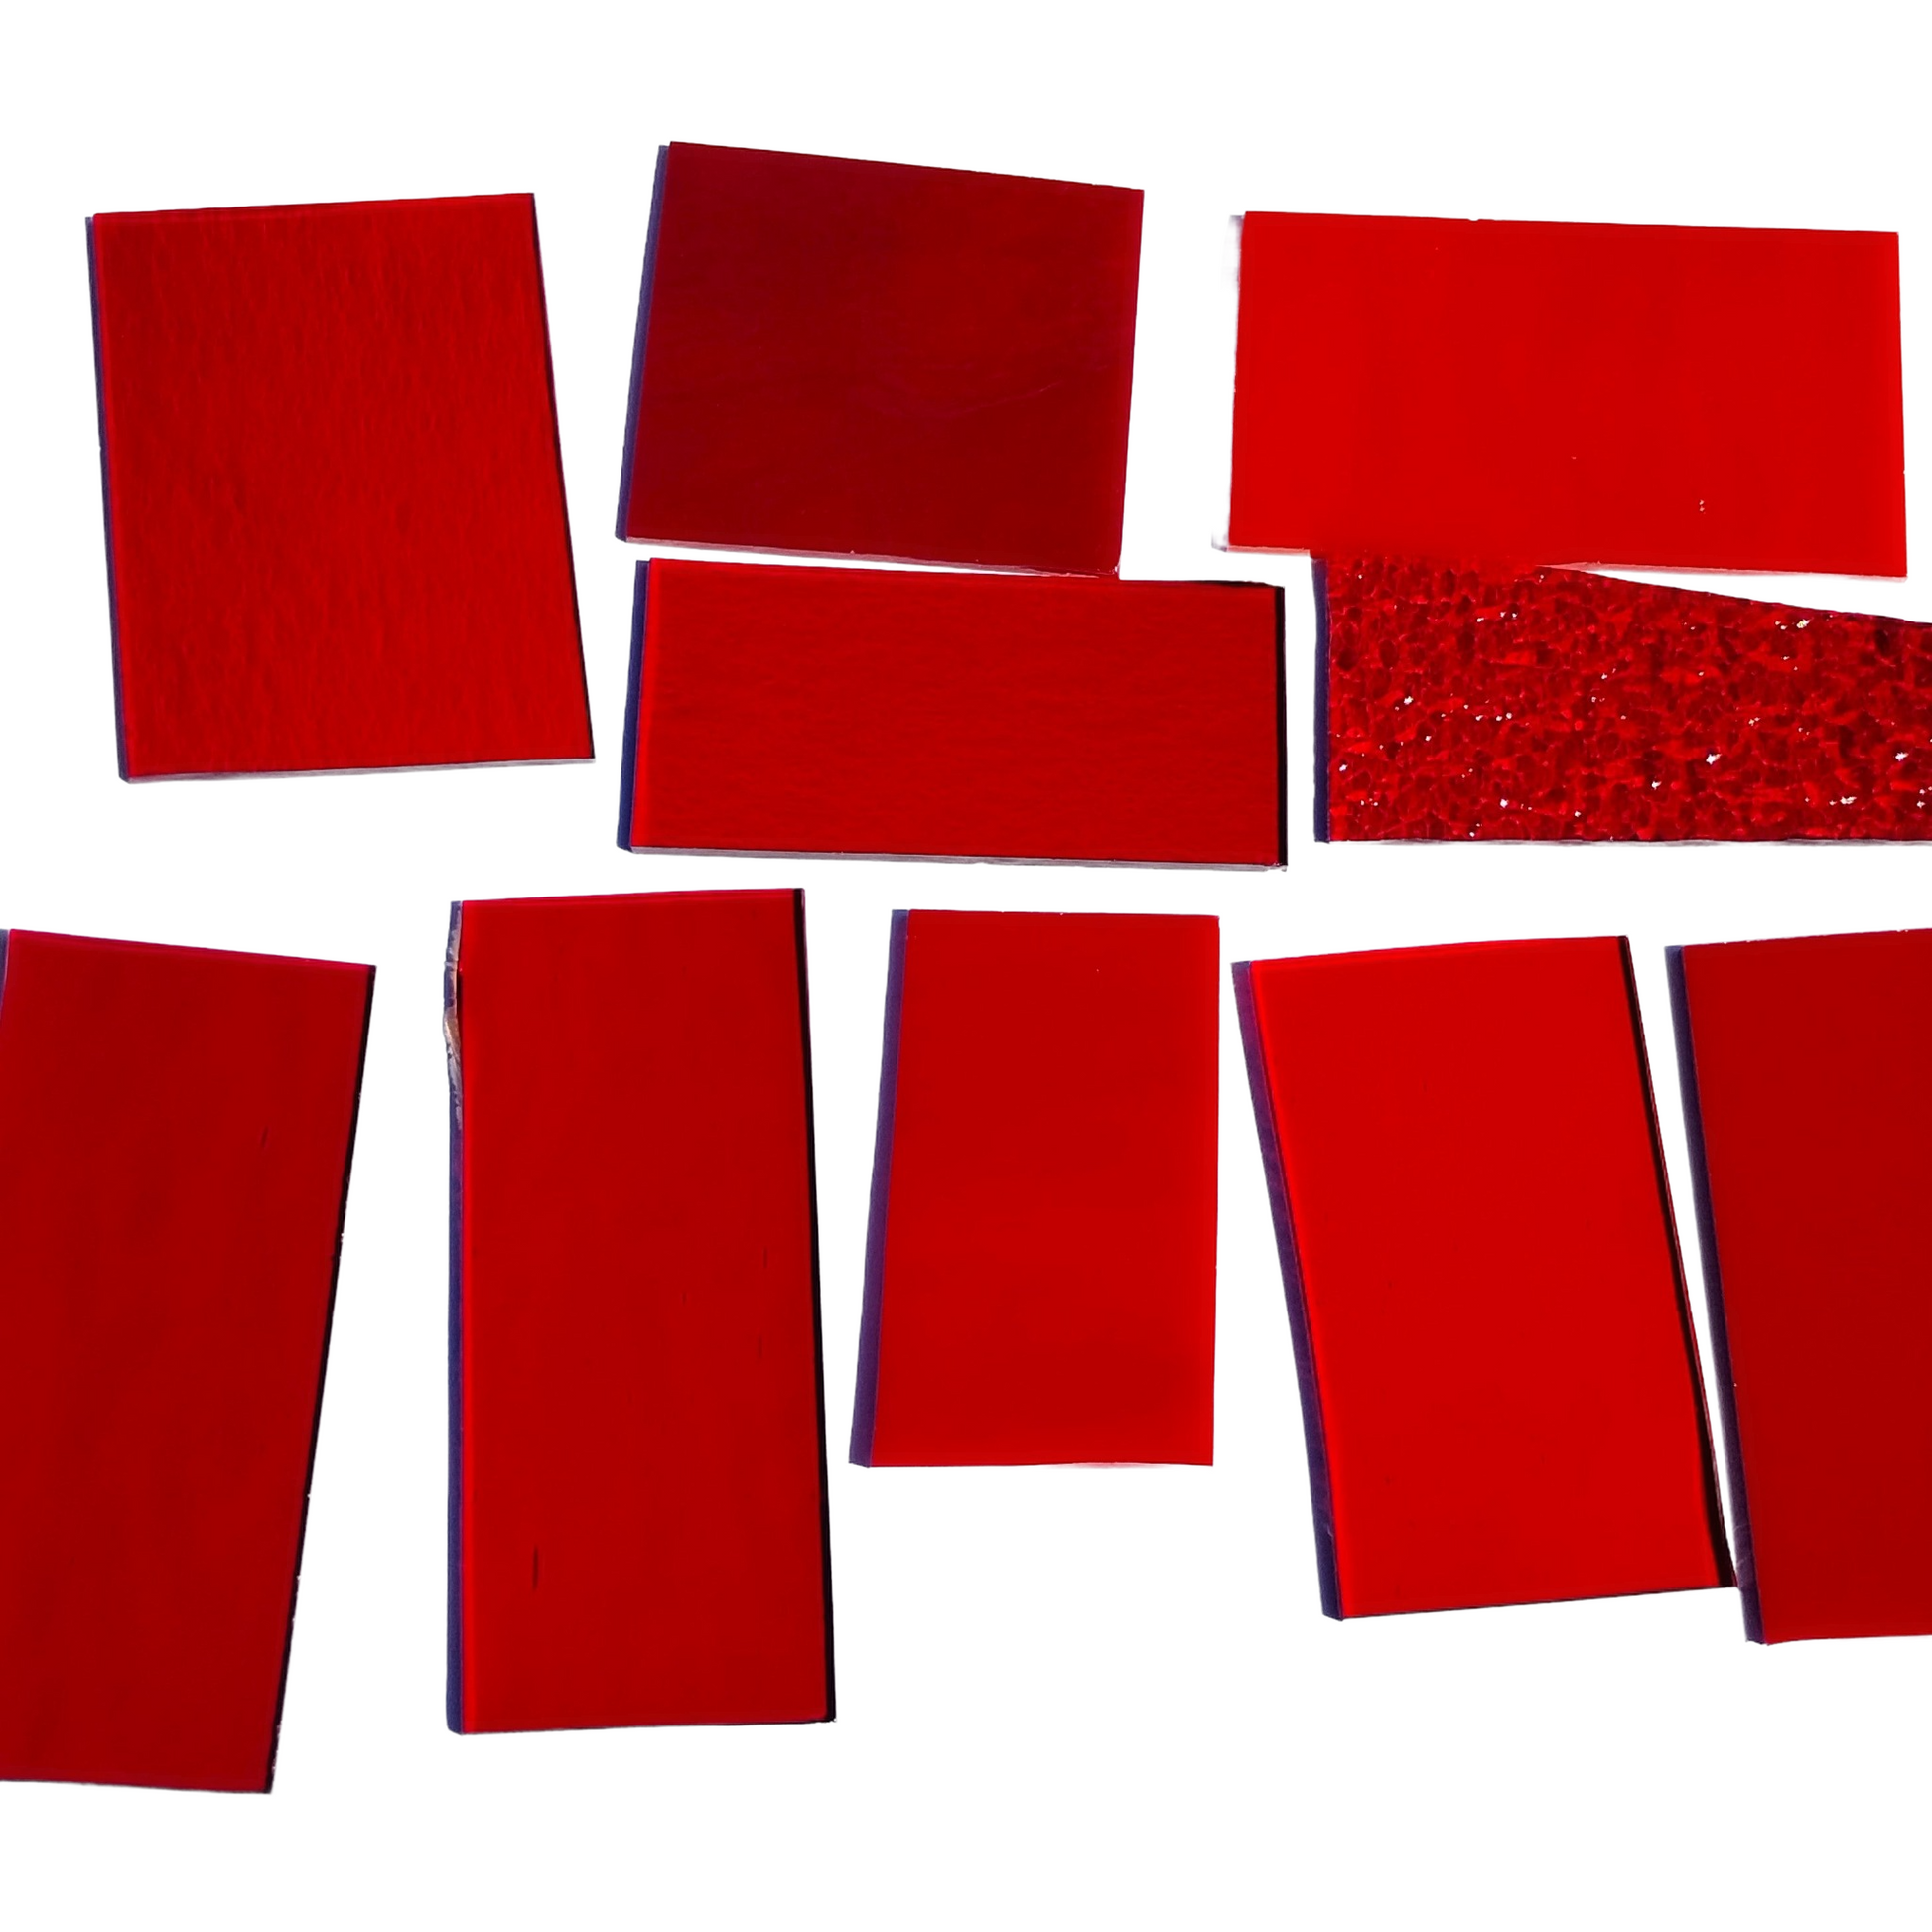 Assorted Red Stained Glass Scrap Pieces, Curated 1 lb Package. Hand picked, sorted by color, clean. Red art glass assortment perfect for stained glass and mosaic art. Ships carefully in 1 business day. Free shipping available.